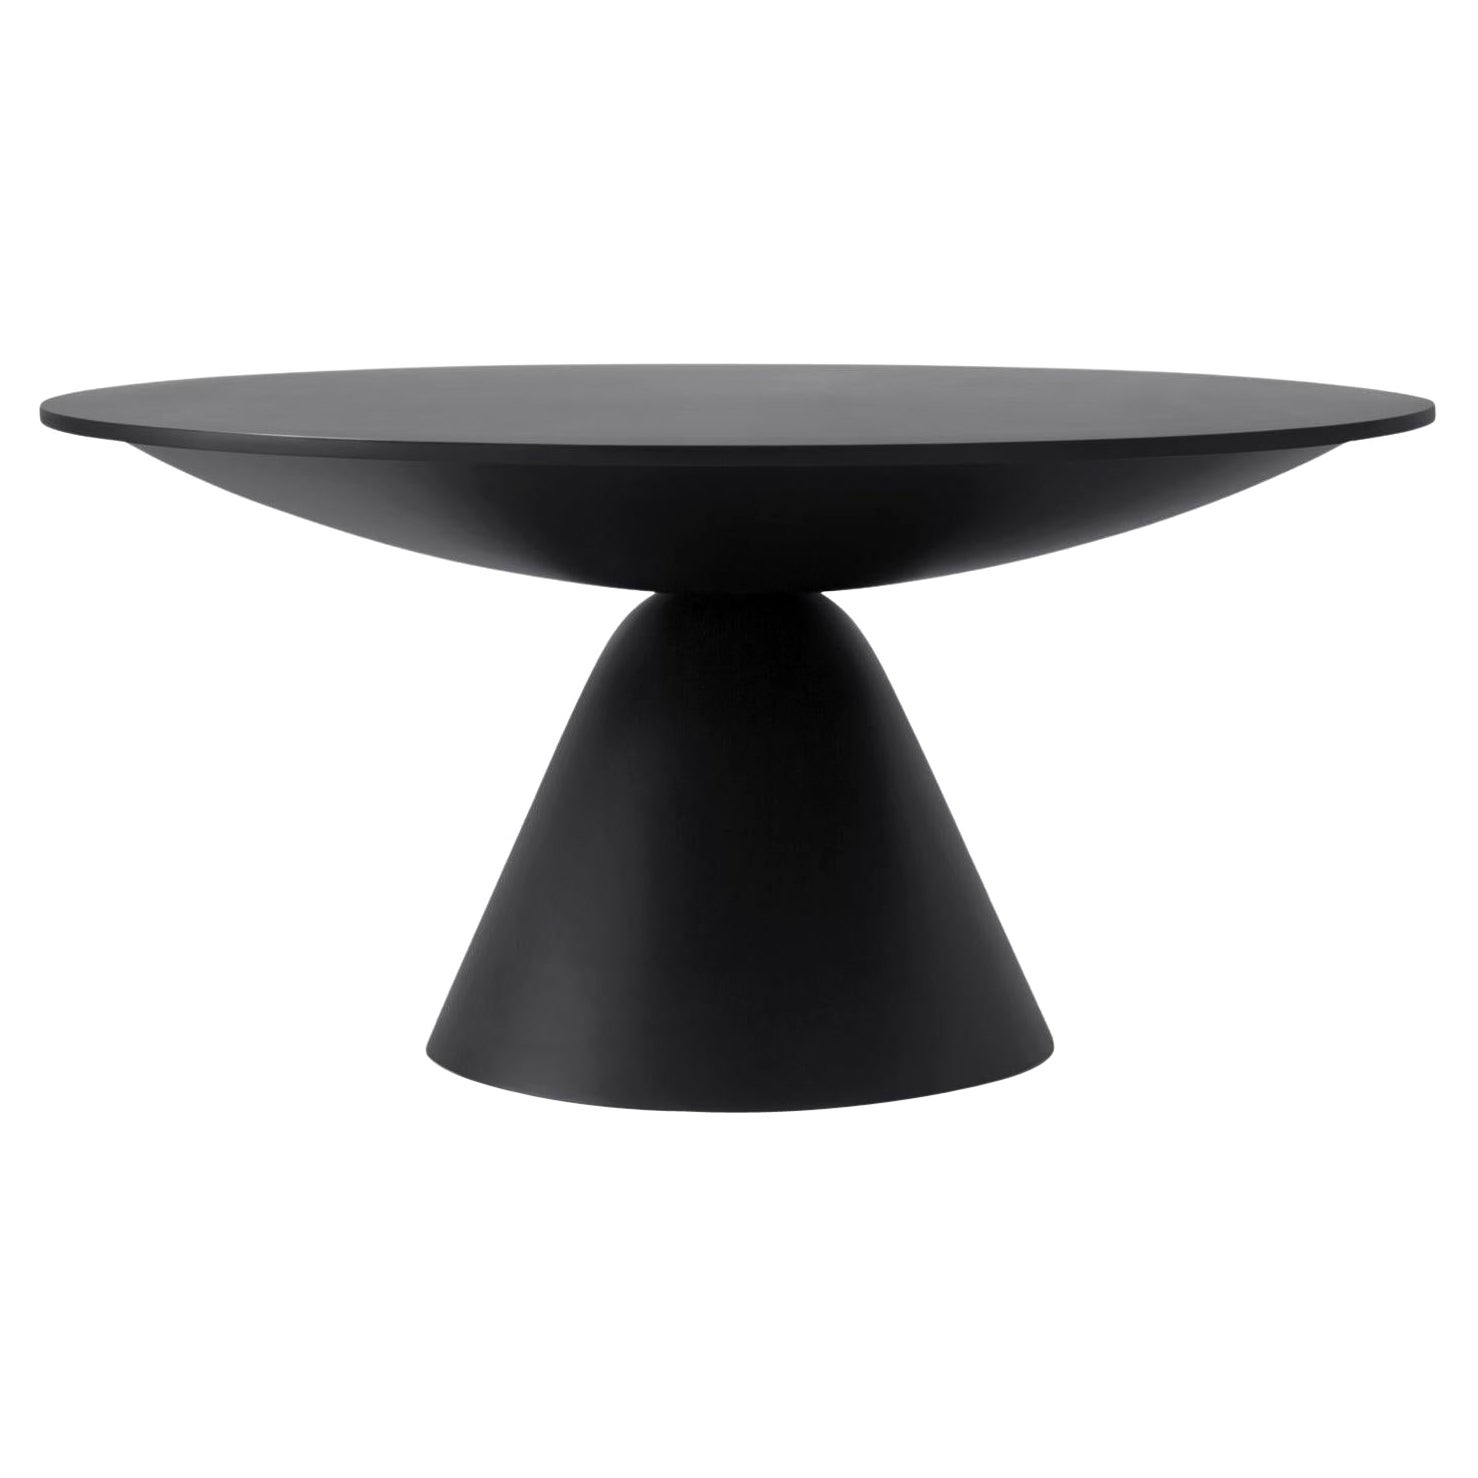 Plateau Table by Imperfettolab